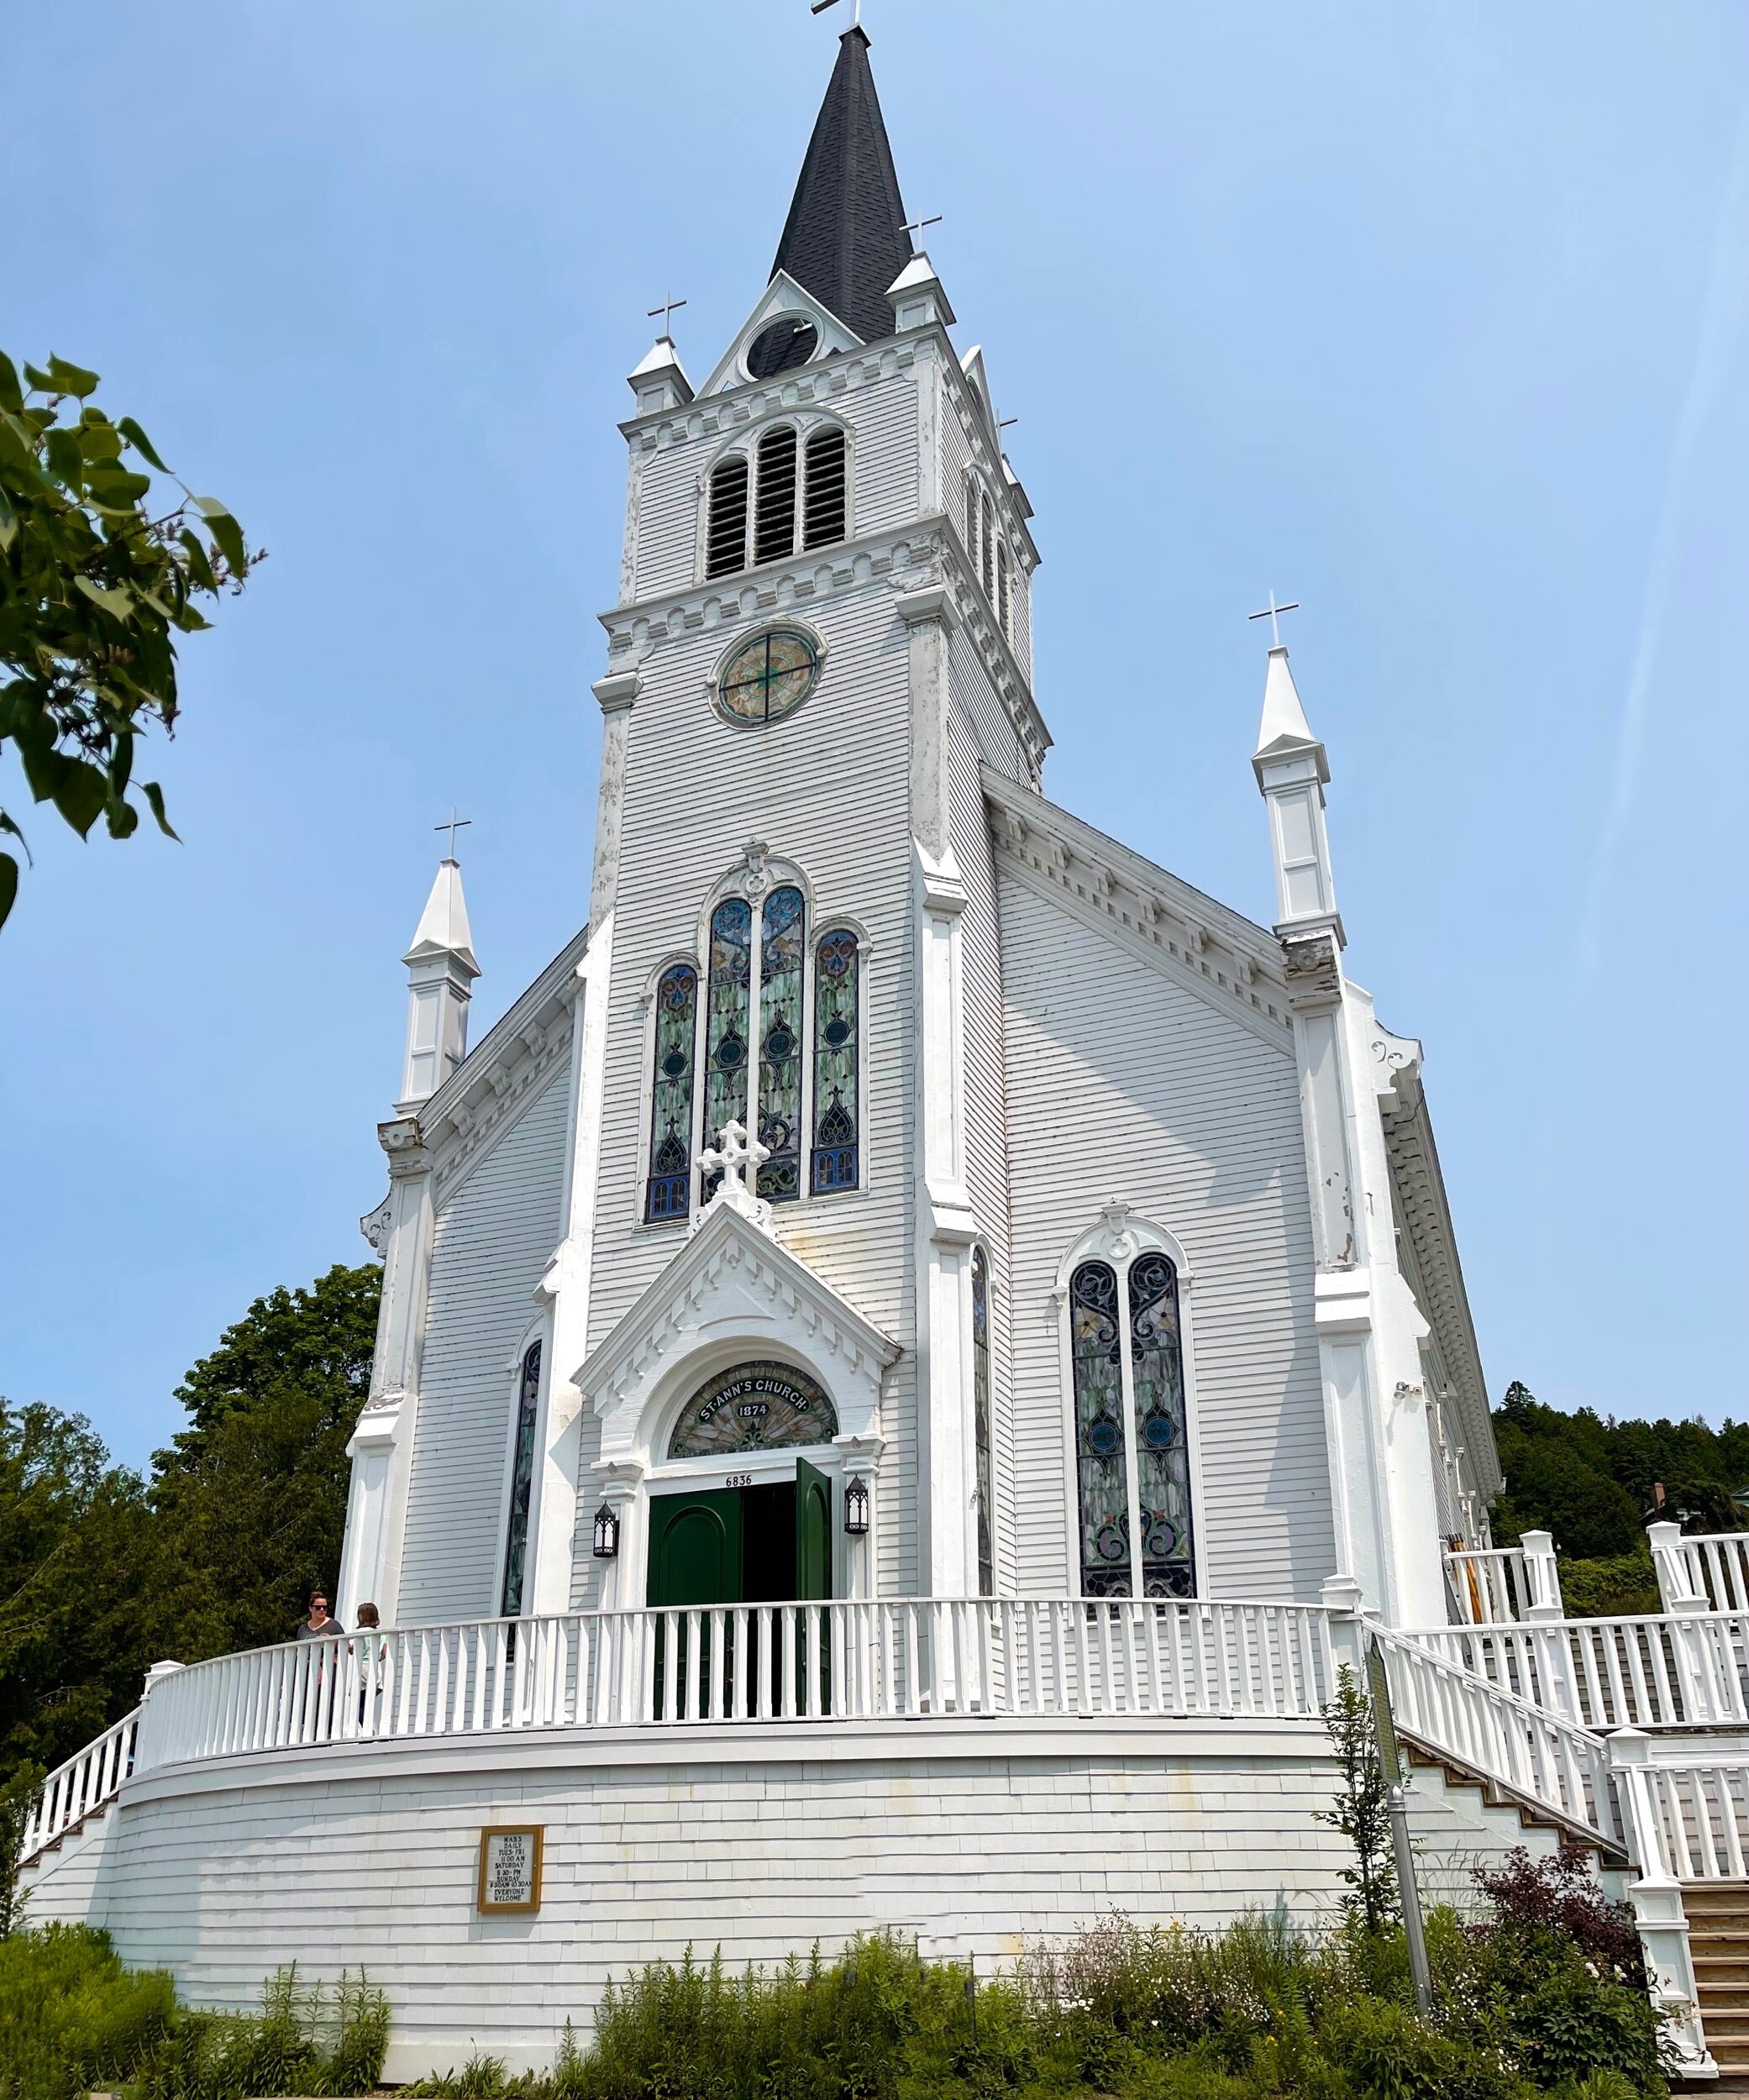  Michigan's oldest church,  St. Anne's Catholic Church . The rites of the Catholic faith on Mackinac Island were inaugurated in 1670, but the earliest surviving parish records began in April 1695. For decades, the parish used a historic log church fo